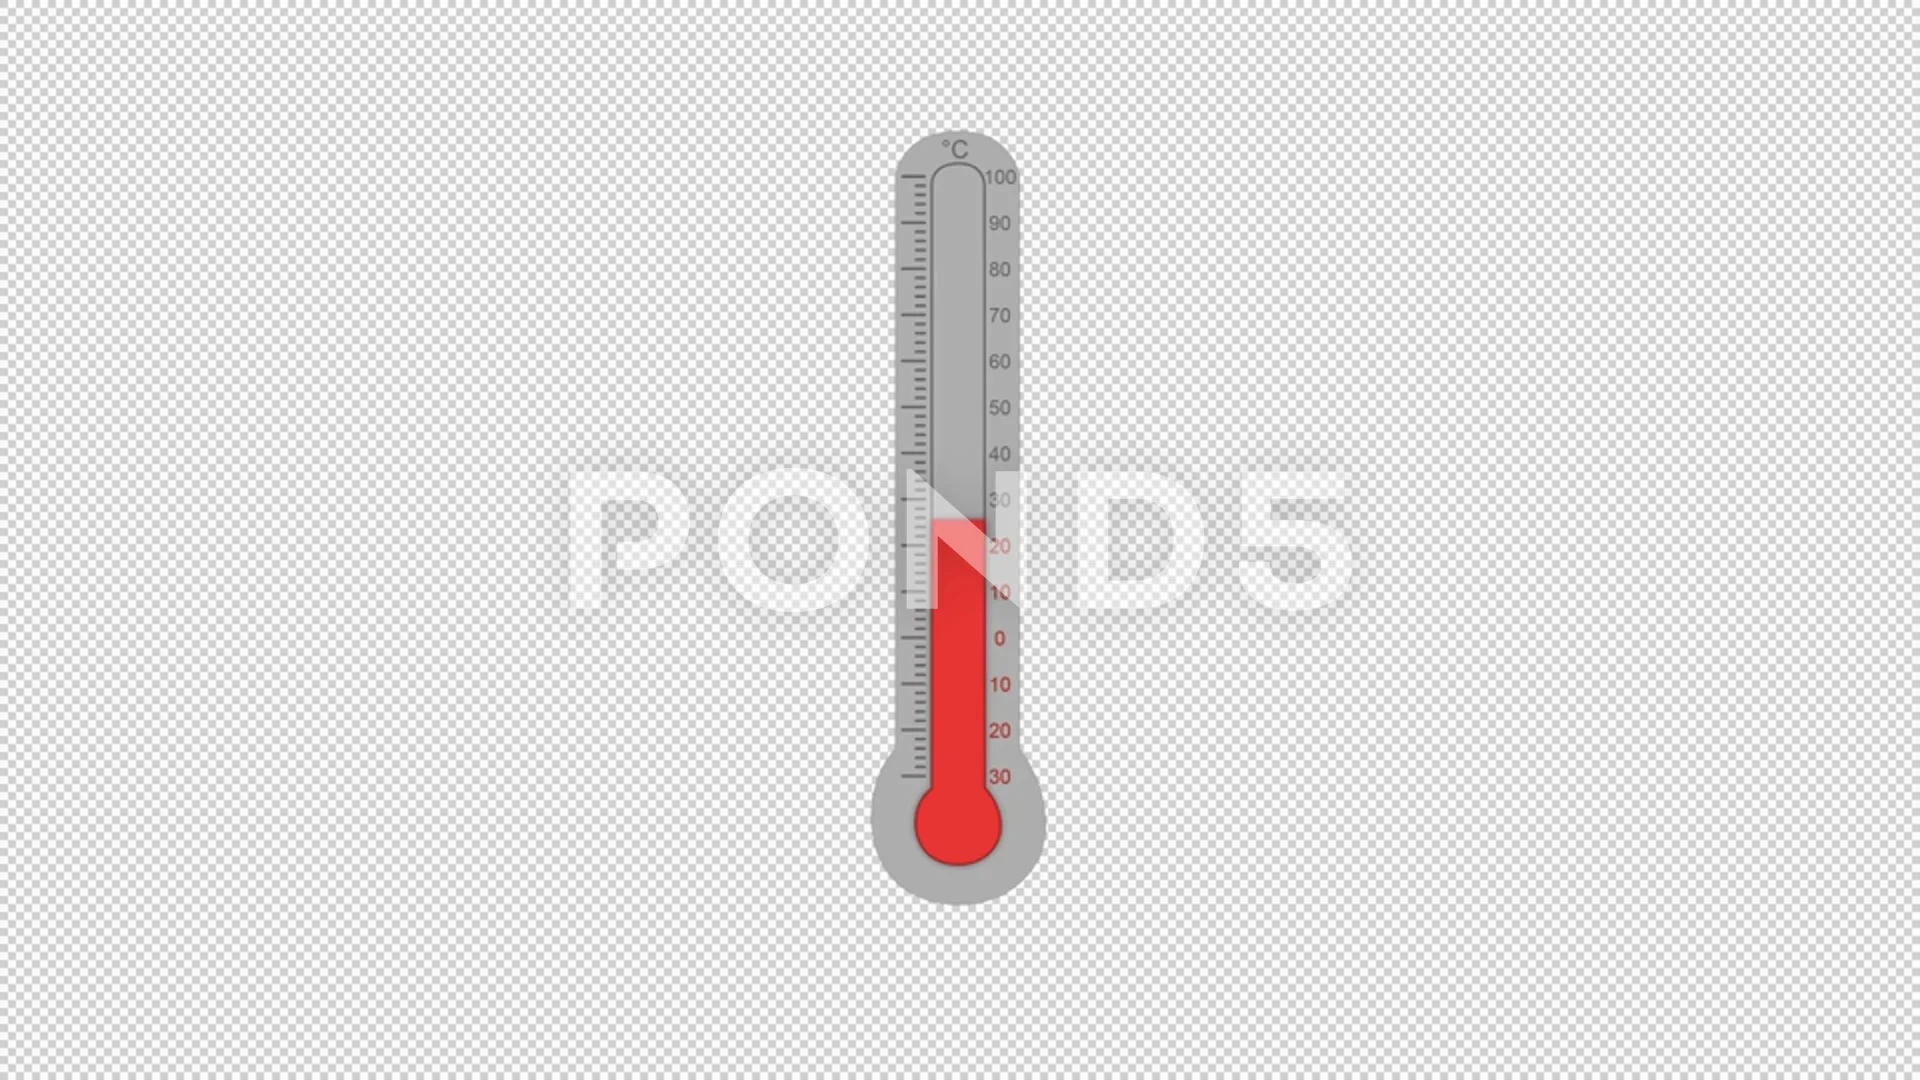 300+ Free Thermometer & Temperature Images - Pixabay